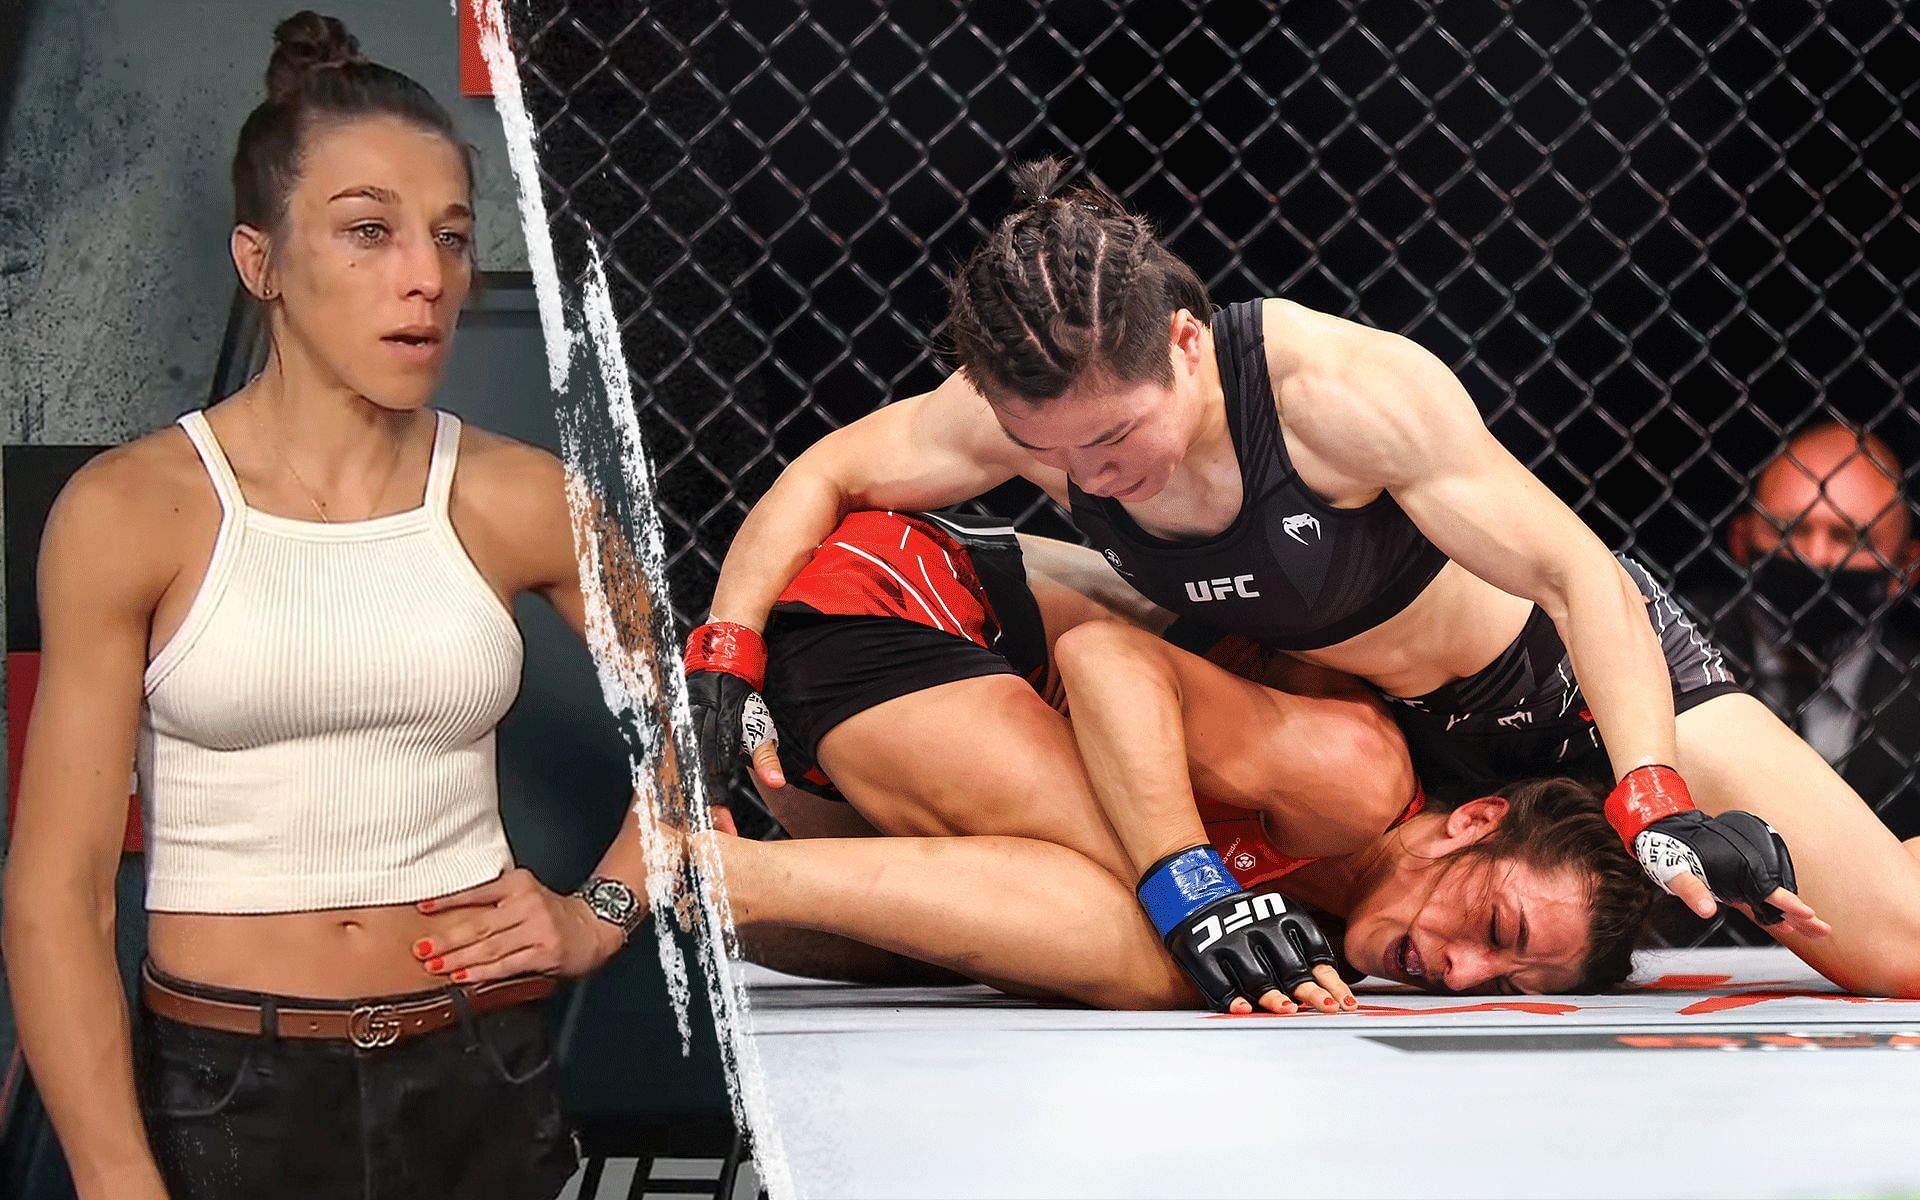 Joanna Jedrzejczyk fought Zhang Weili in a rematch at UFC 275 [Image credits: Getty and ESPN MMA&#039;s YouTube channel]